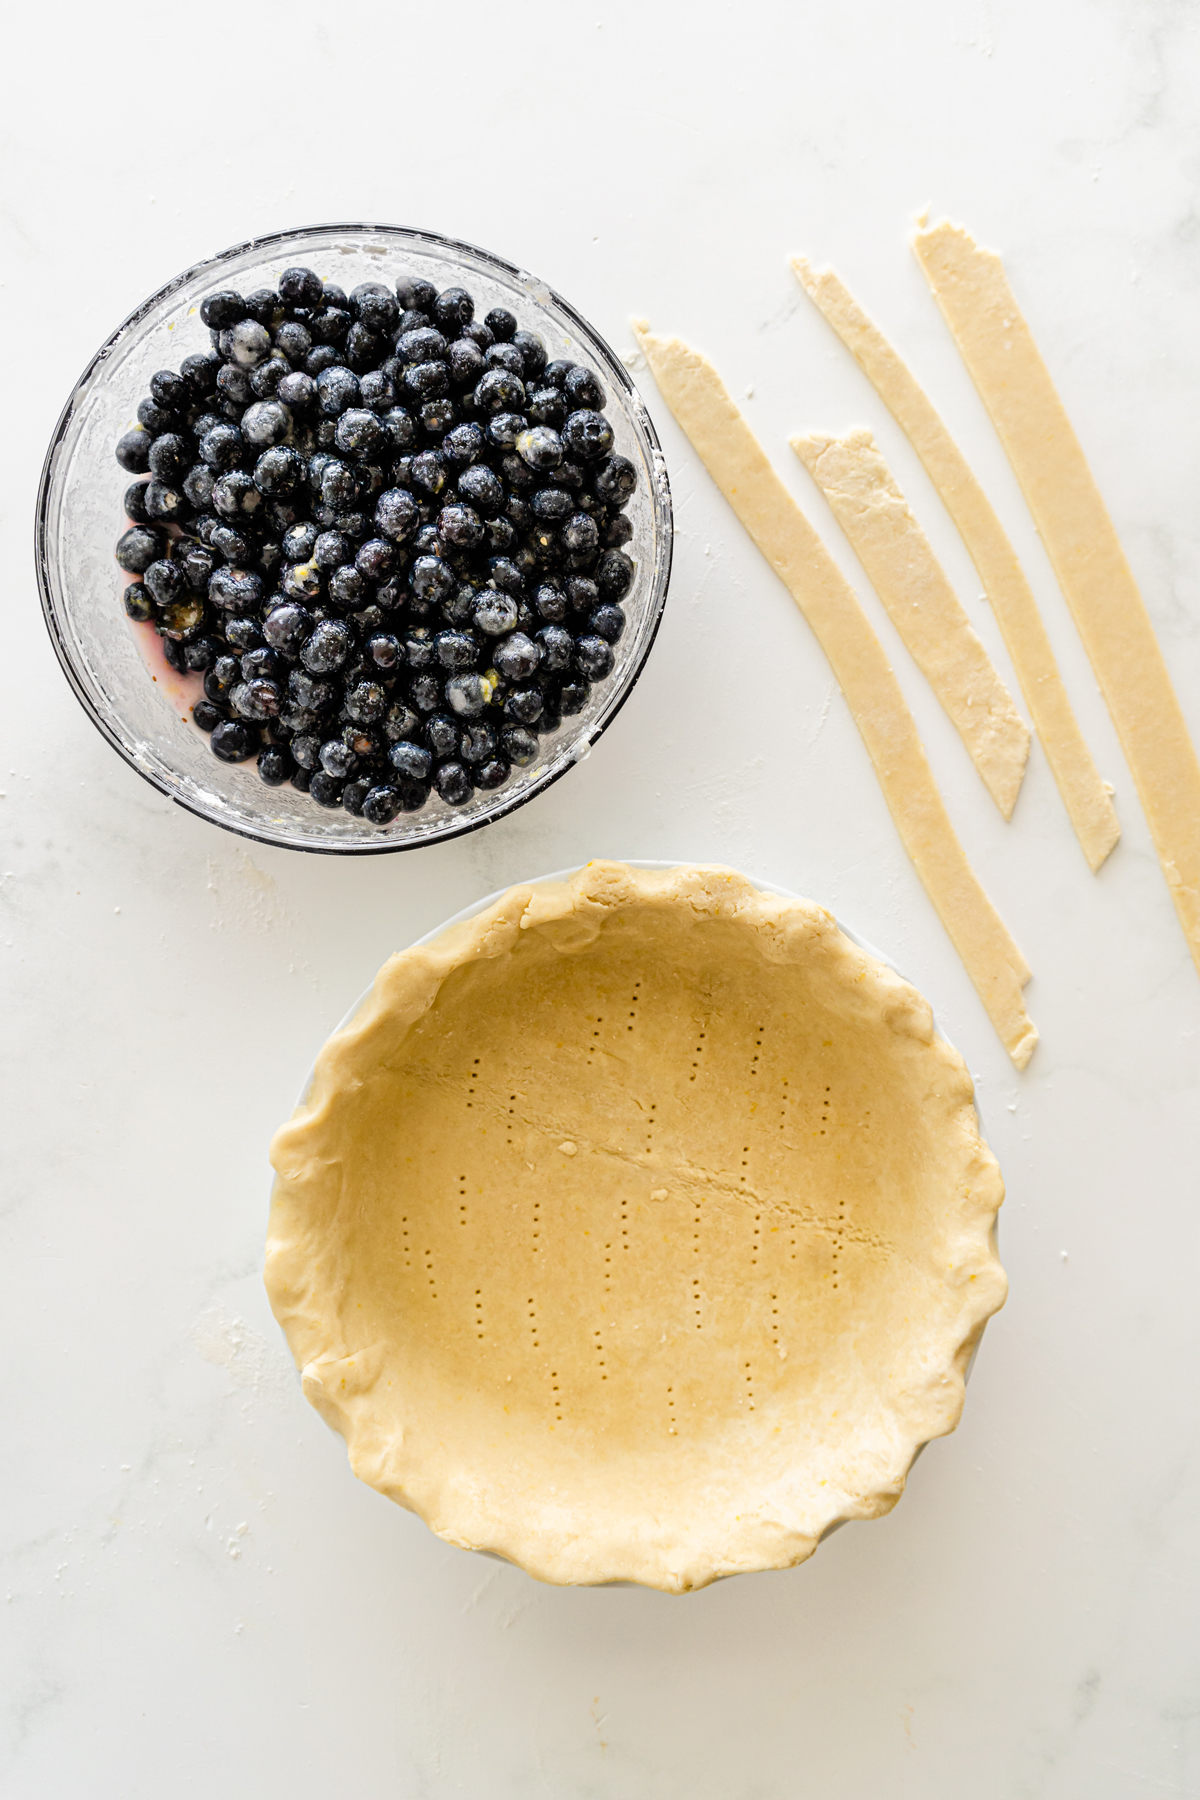 Top view of a table with a pie dish with round pastry on bottom, a big bowl of blueberries next to it, with strips of pastry next to it. 